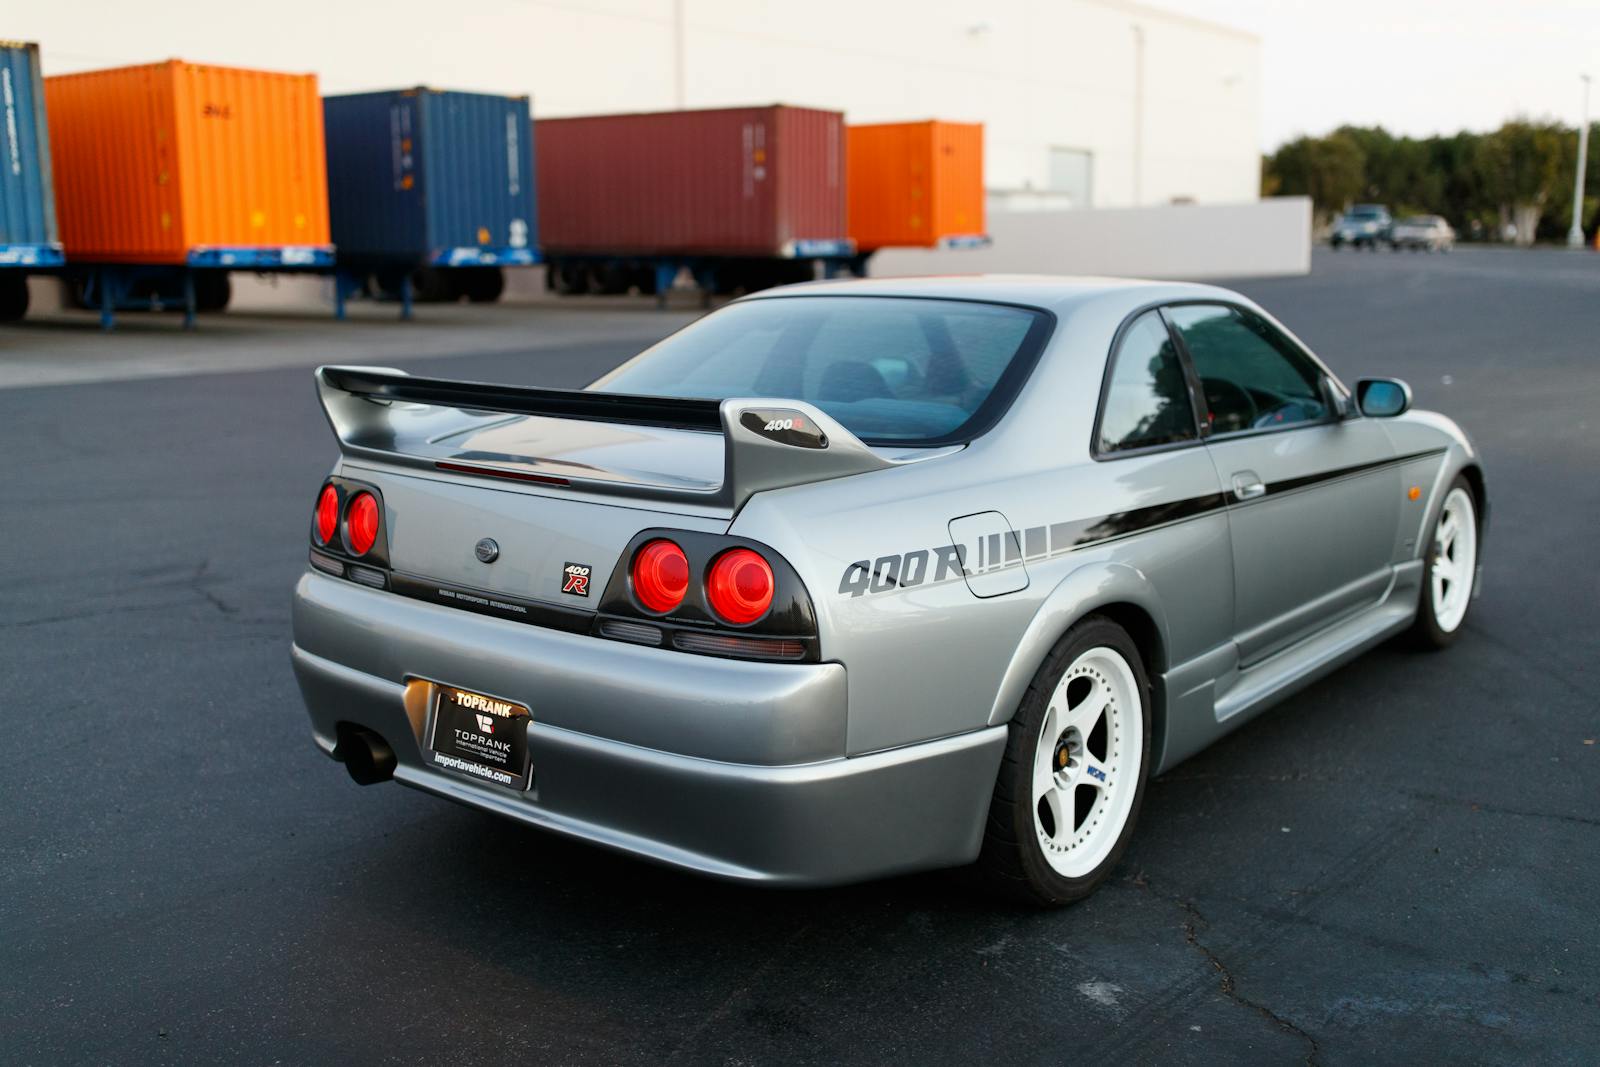 Gran Turismo movie's star GT-R up for auction - Hagerty Media